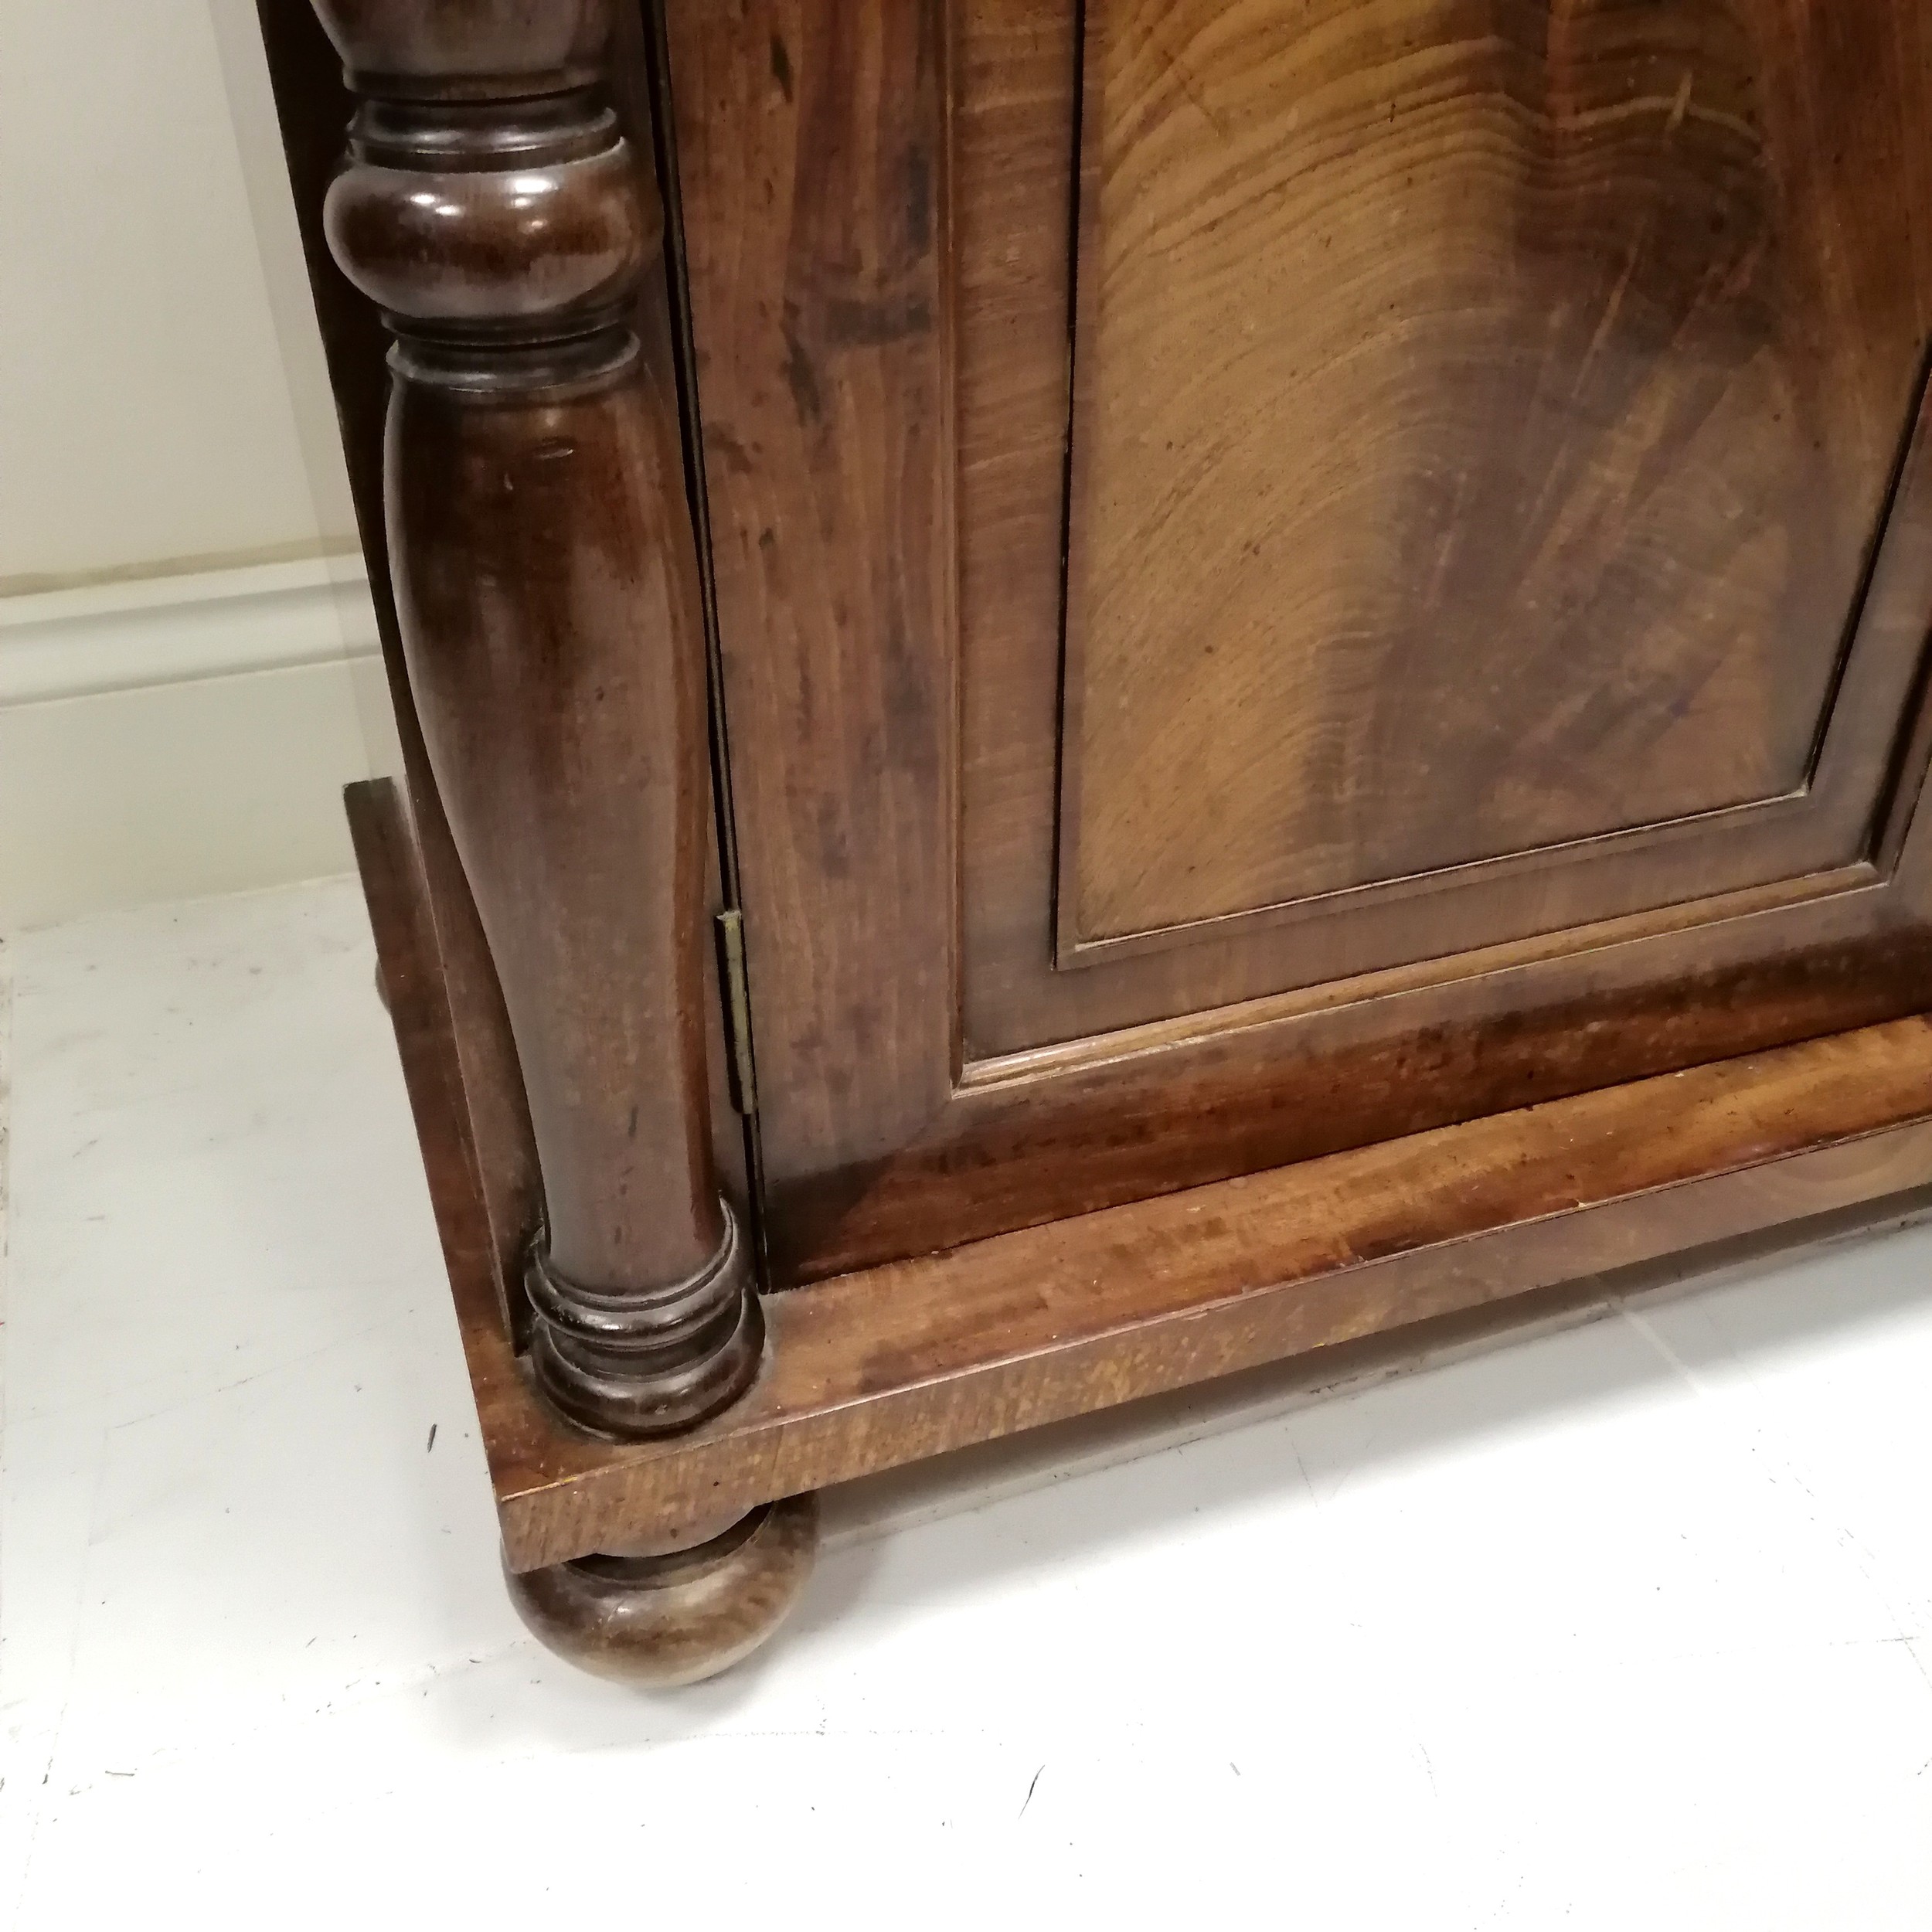 Antique mahogany chiffonier, 2 tier shelf above 2 door cupboard, flanked by turned column - Image 2 of 4